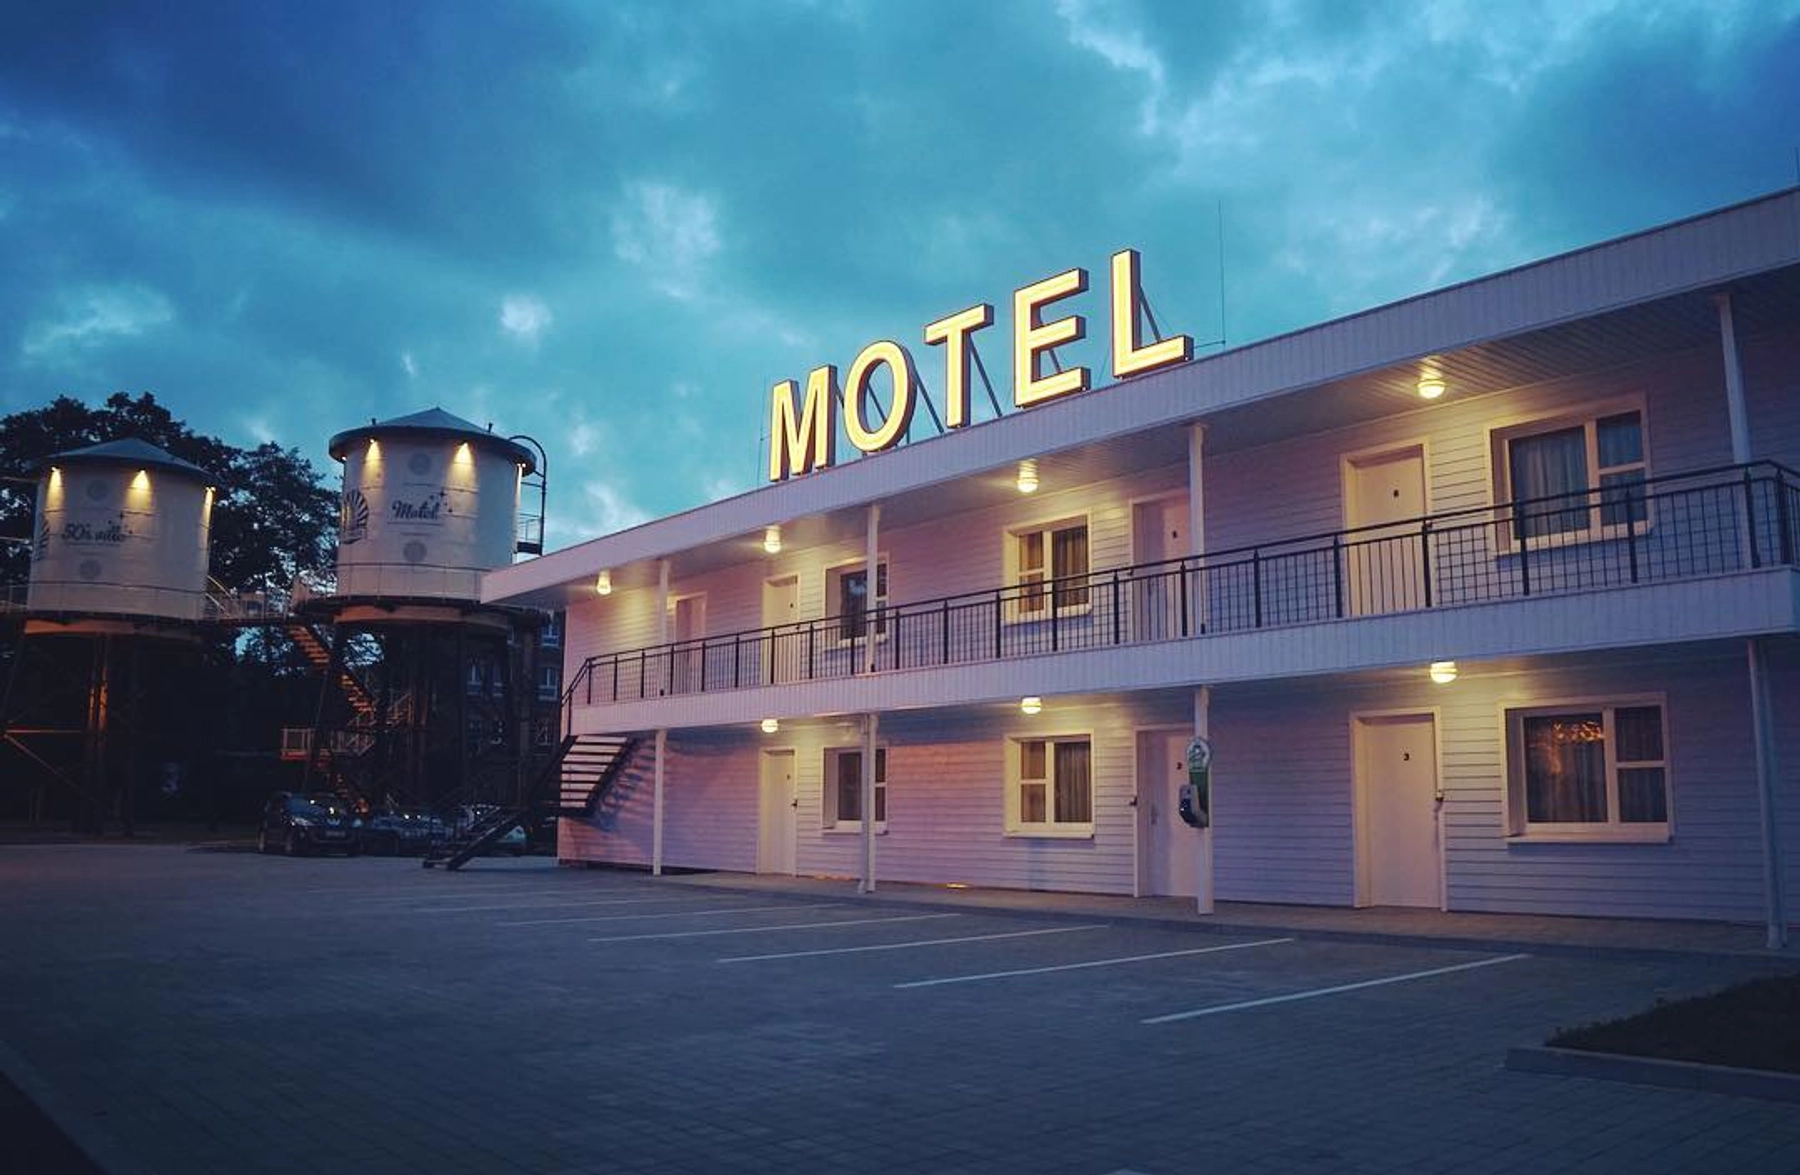 When do we Need a Motel?